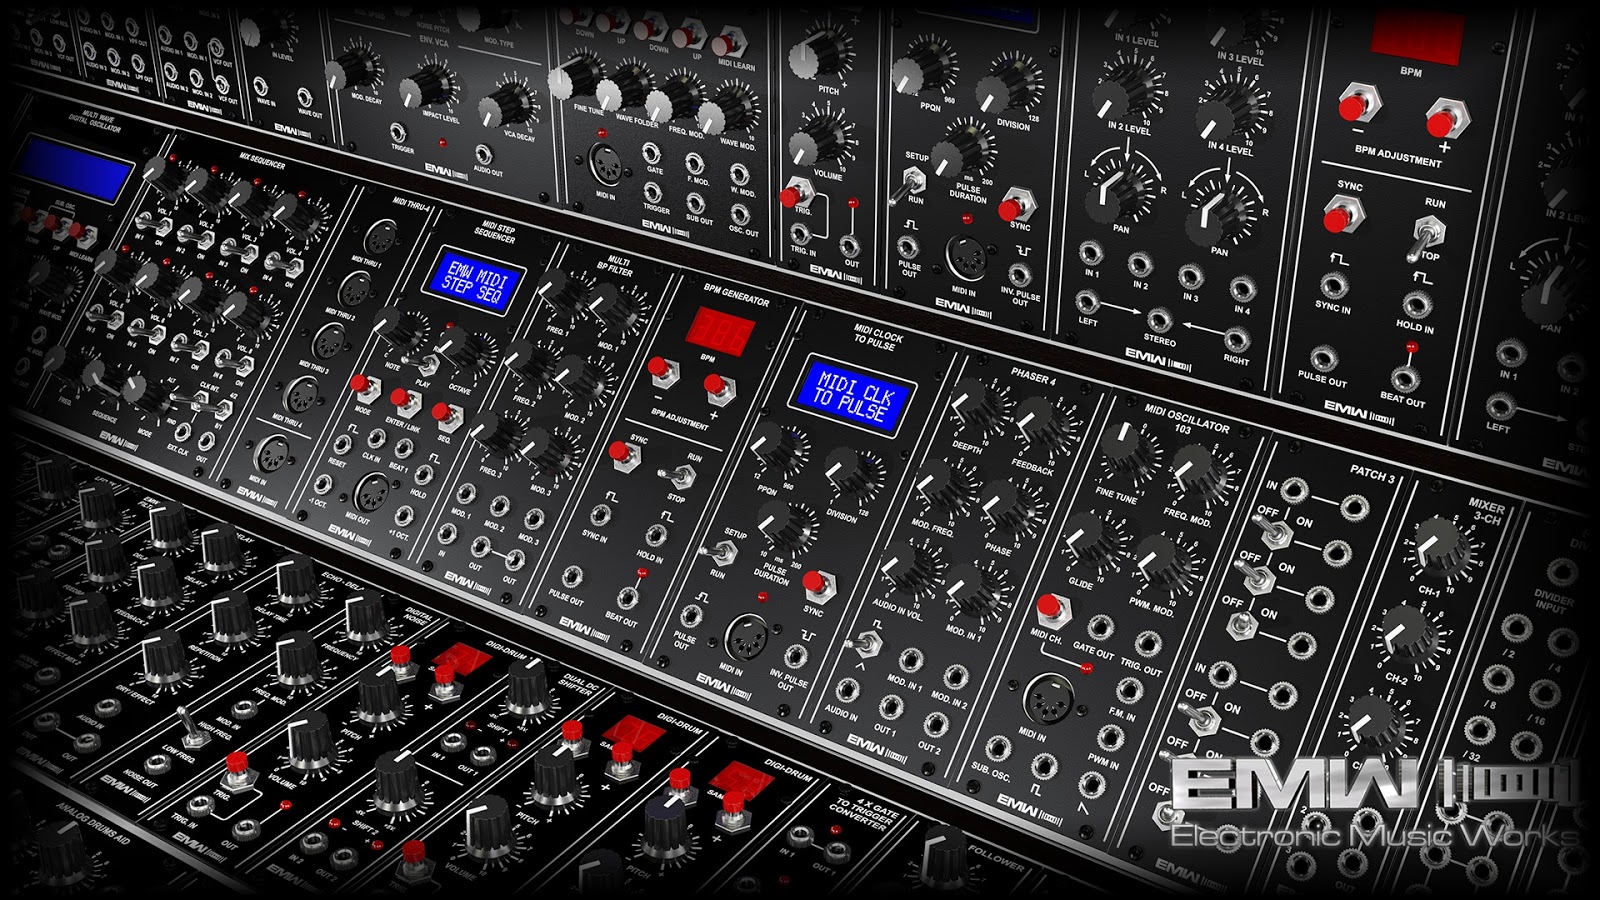 Some Great Synth Wallpaper Via Emw Click The Pic For Full Size